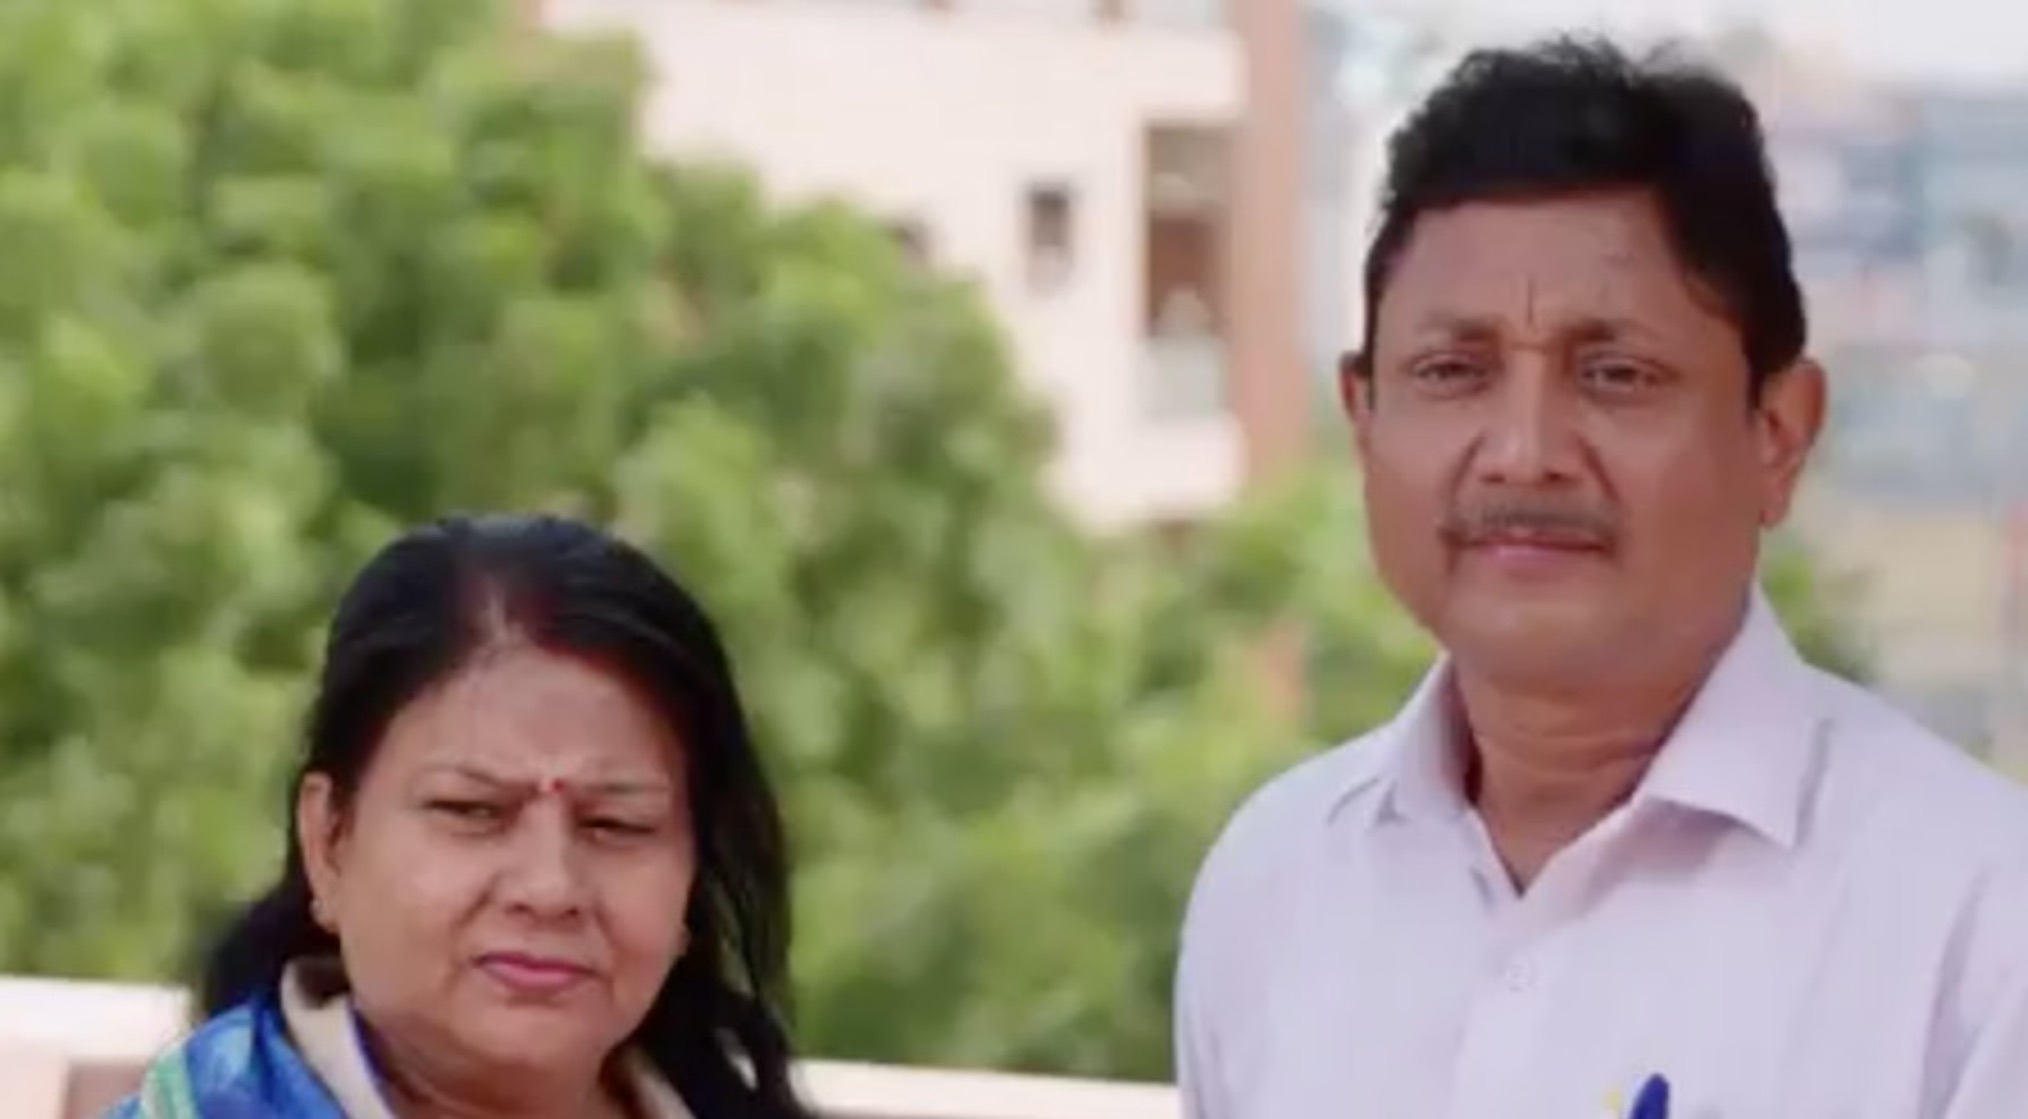 Sumit's Parents_90 Day Fiancé; The Other Way